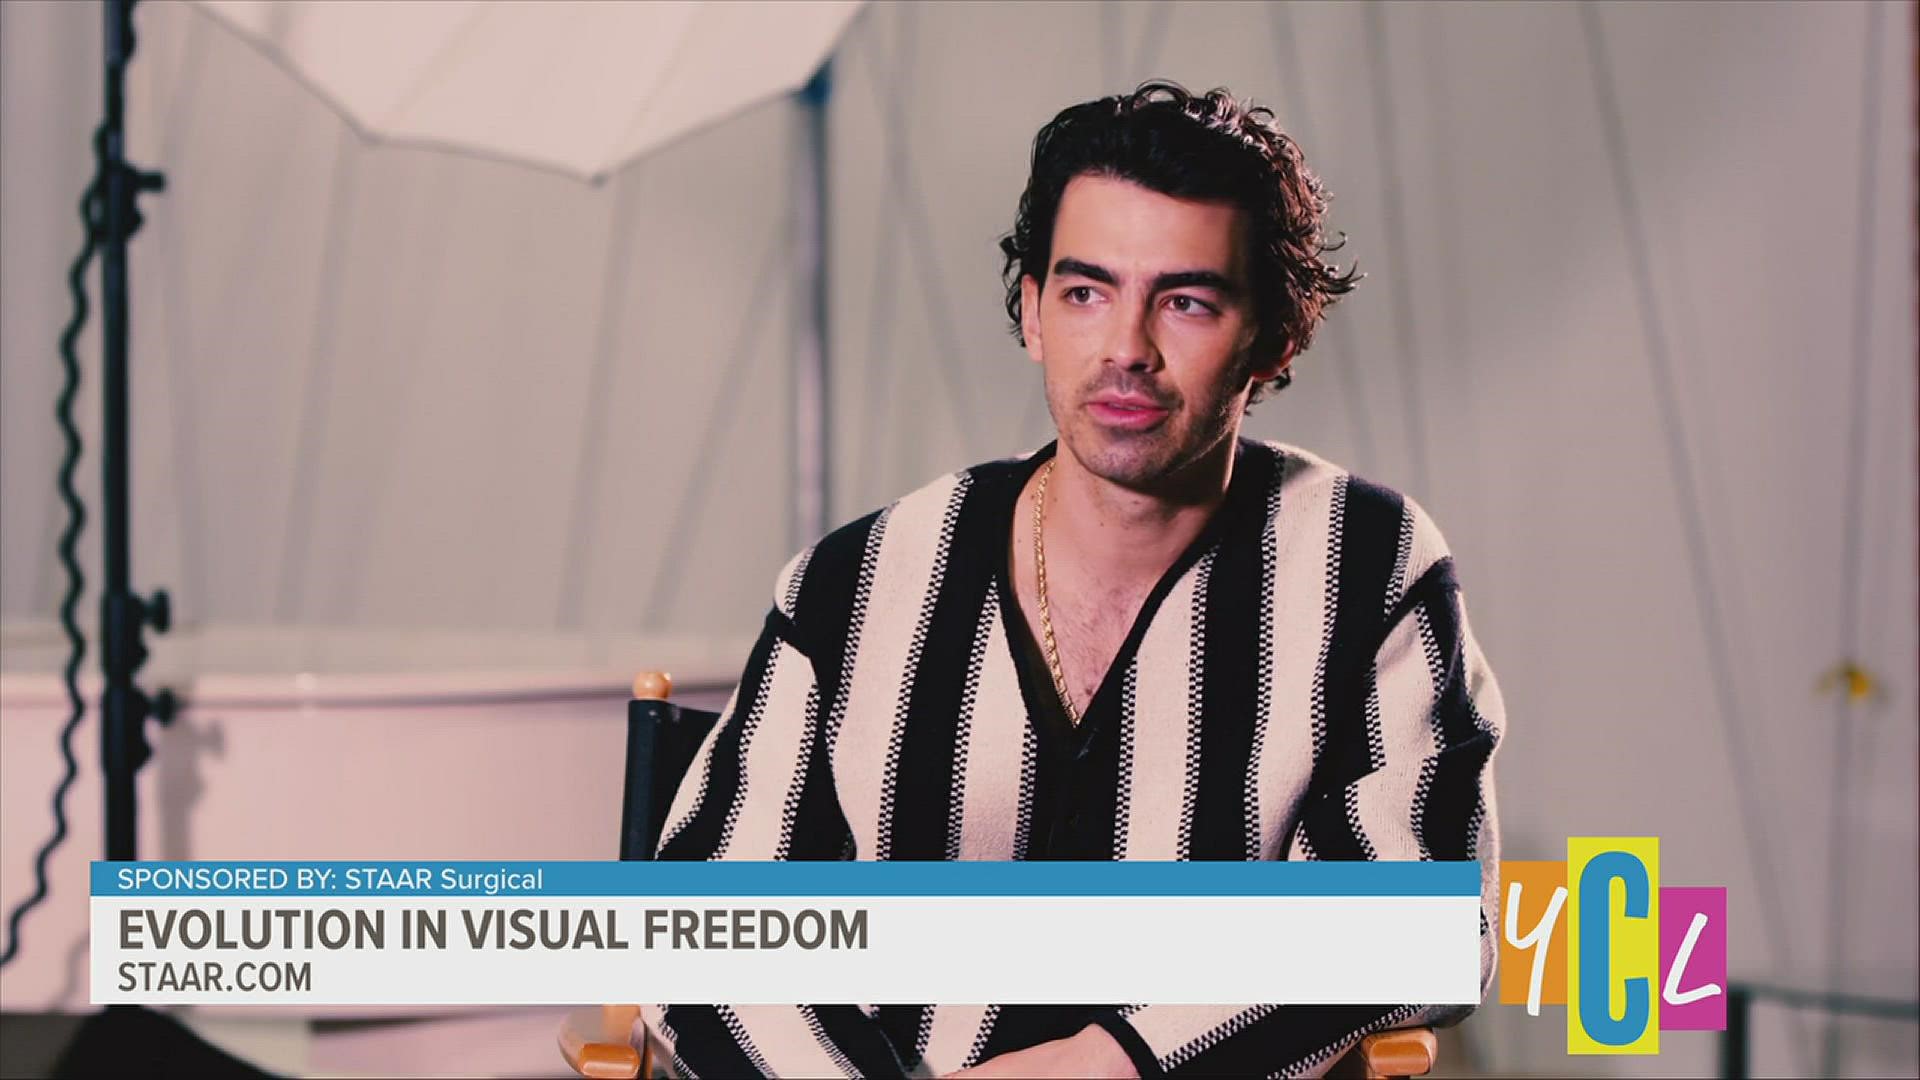 Musician and Actor, Joe Jonas shares his experience on his personal journey to seeing clearer. This segment paid for by STAAR Surgical.